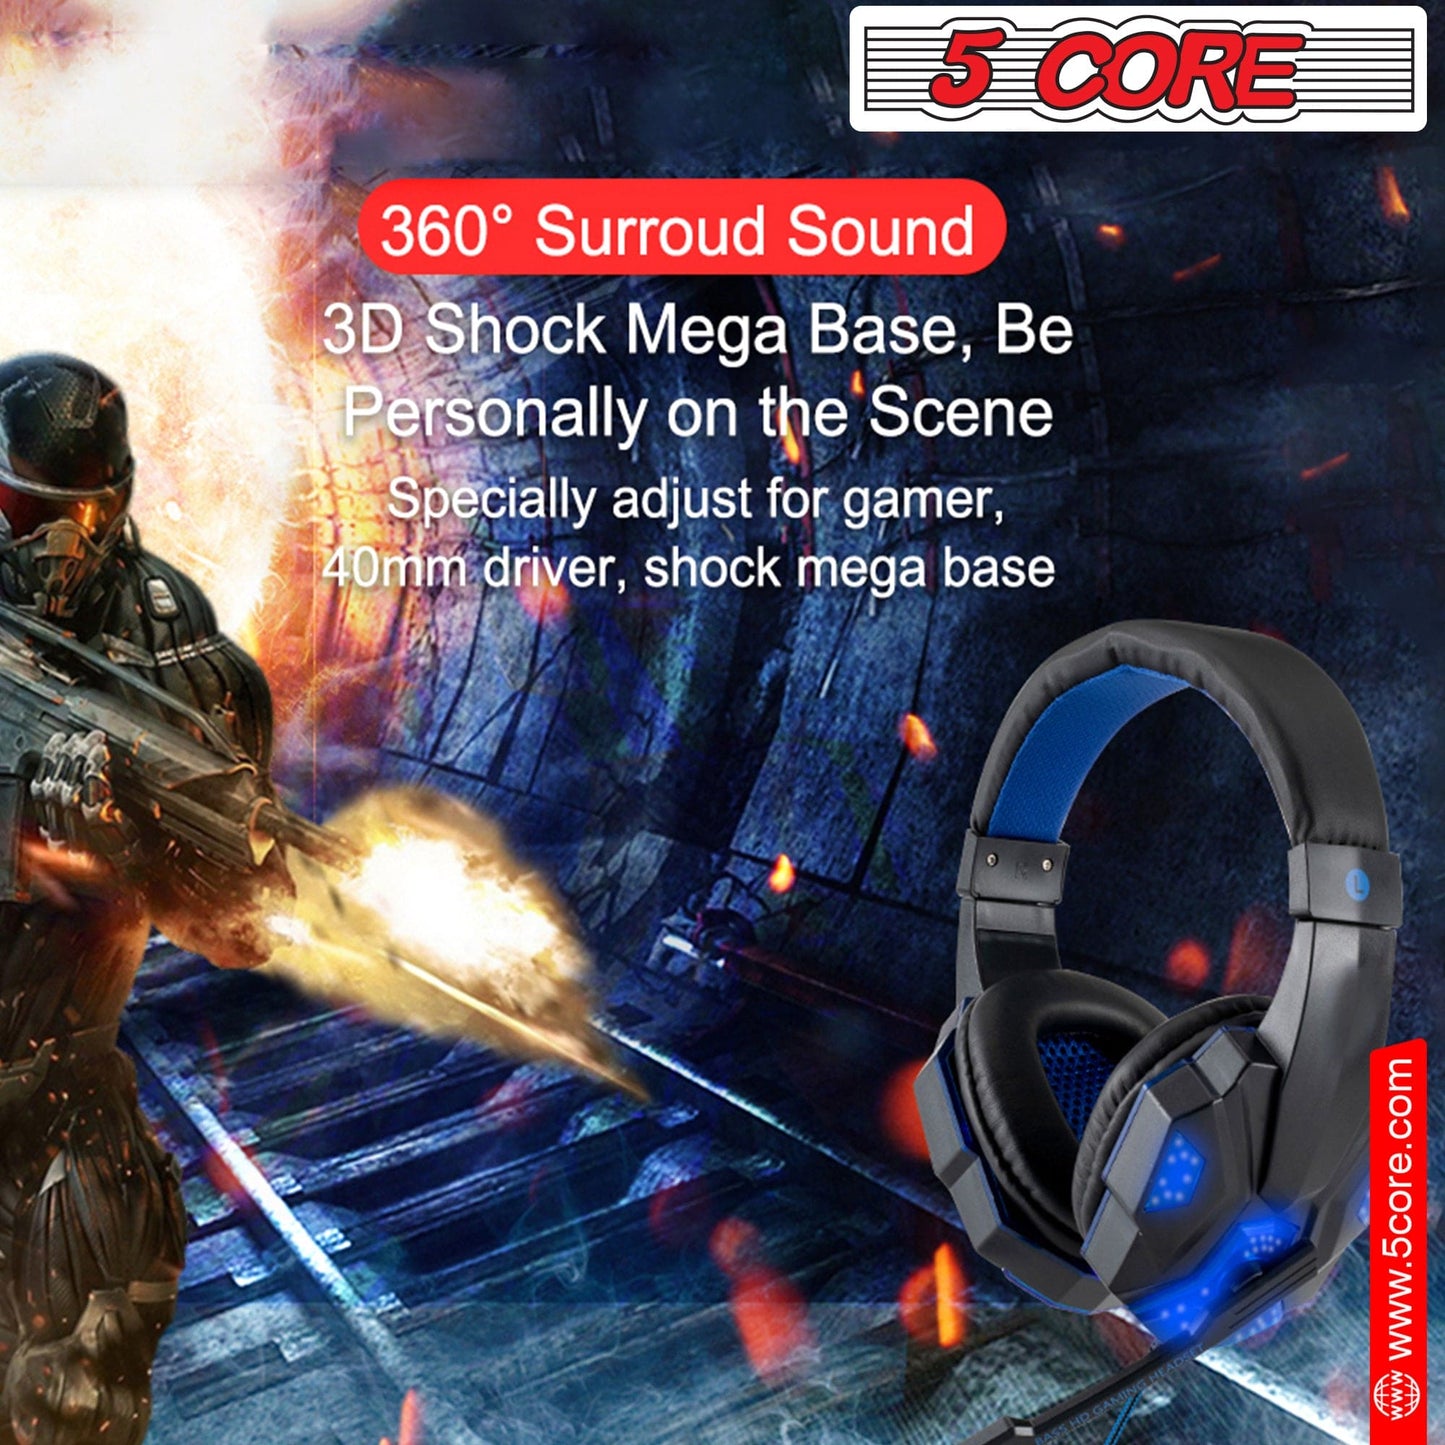 5Core Pro Gaming Headset: Immersive Gaming Headset Experience